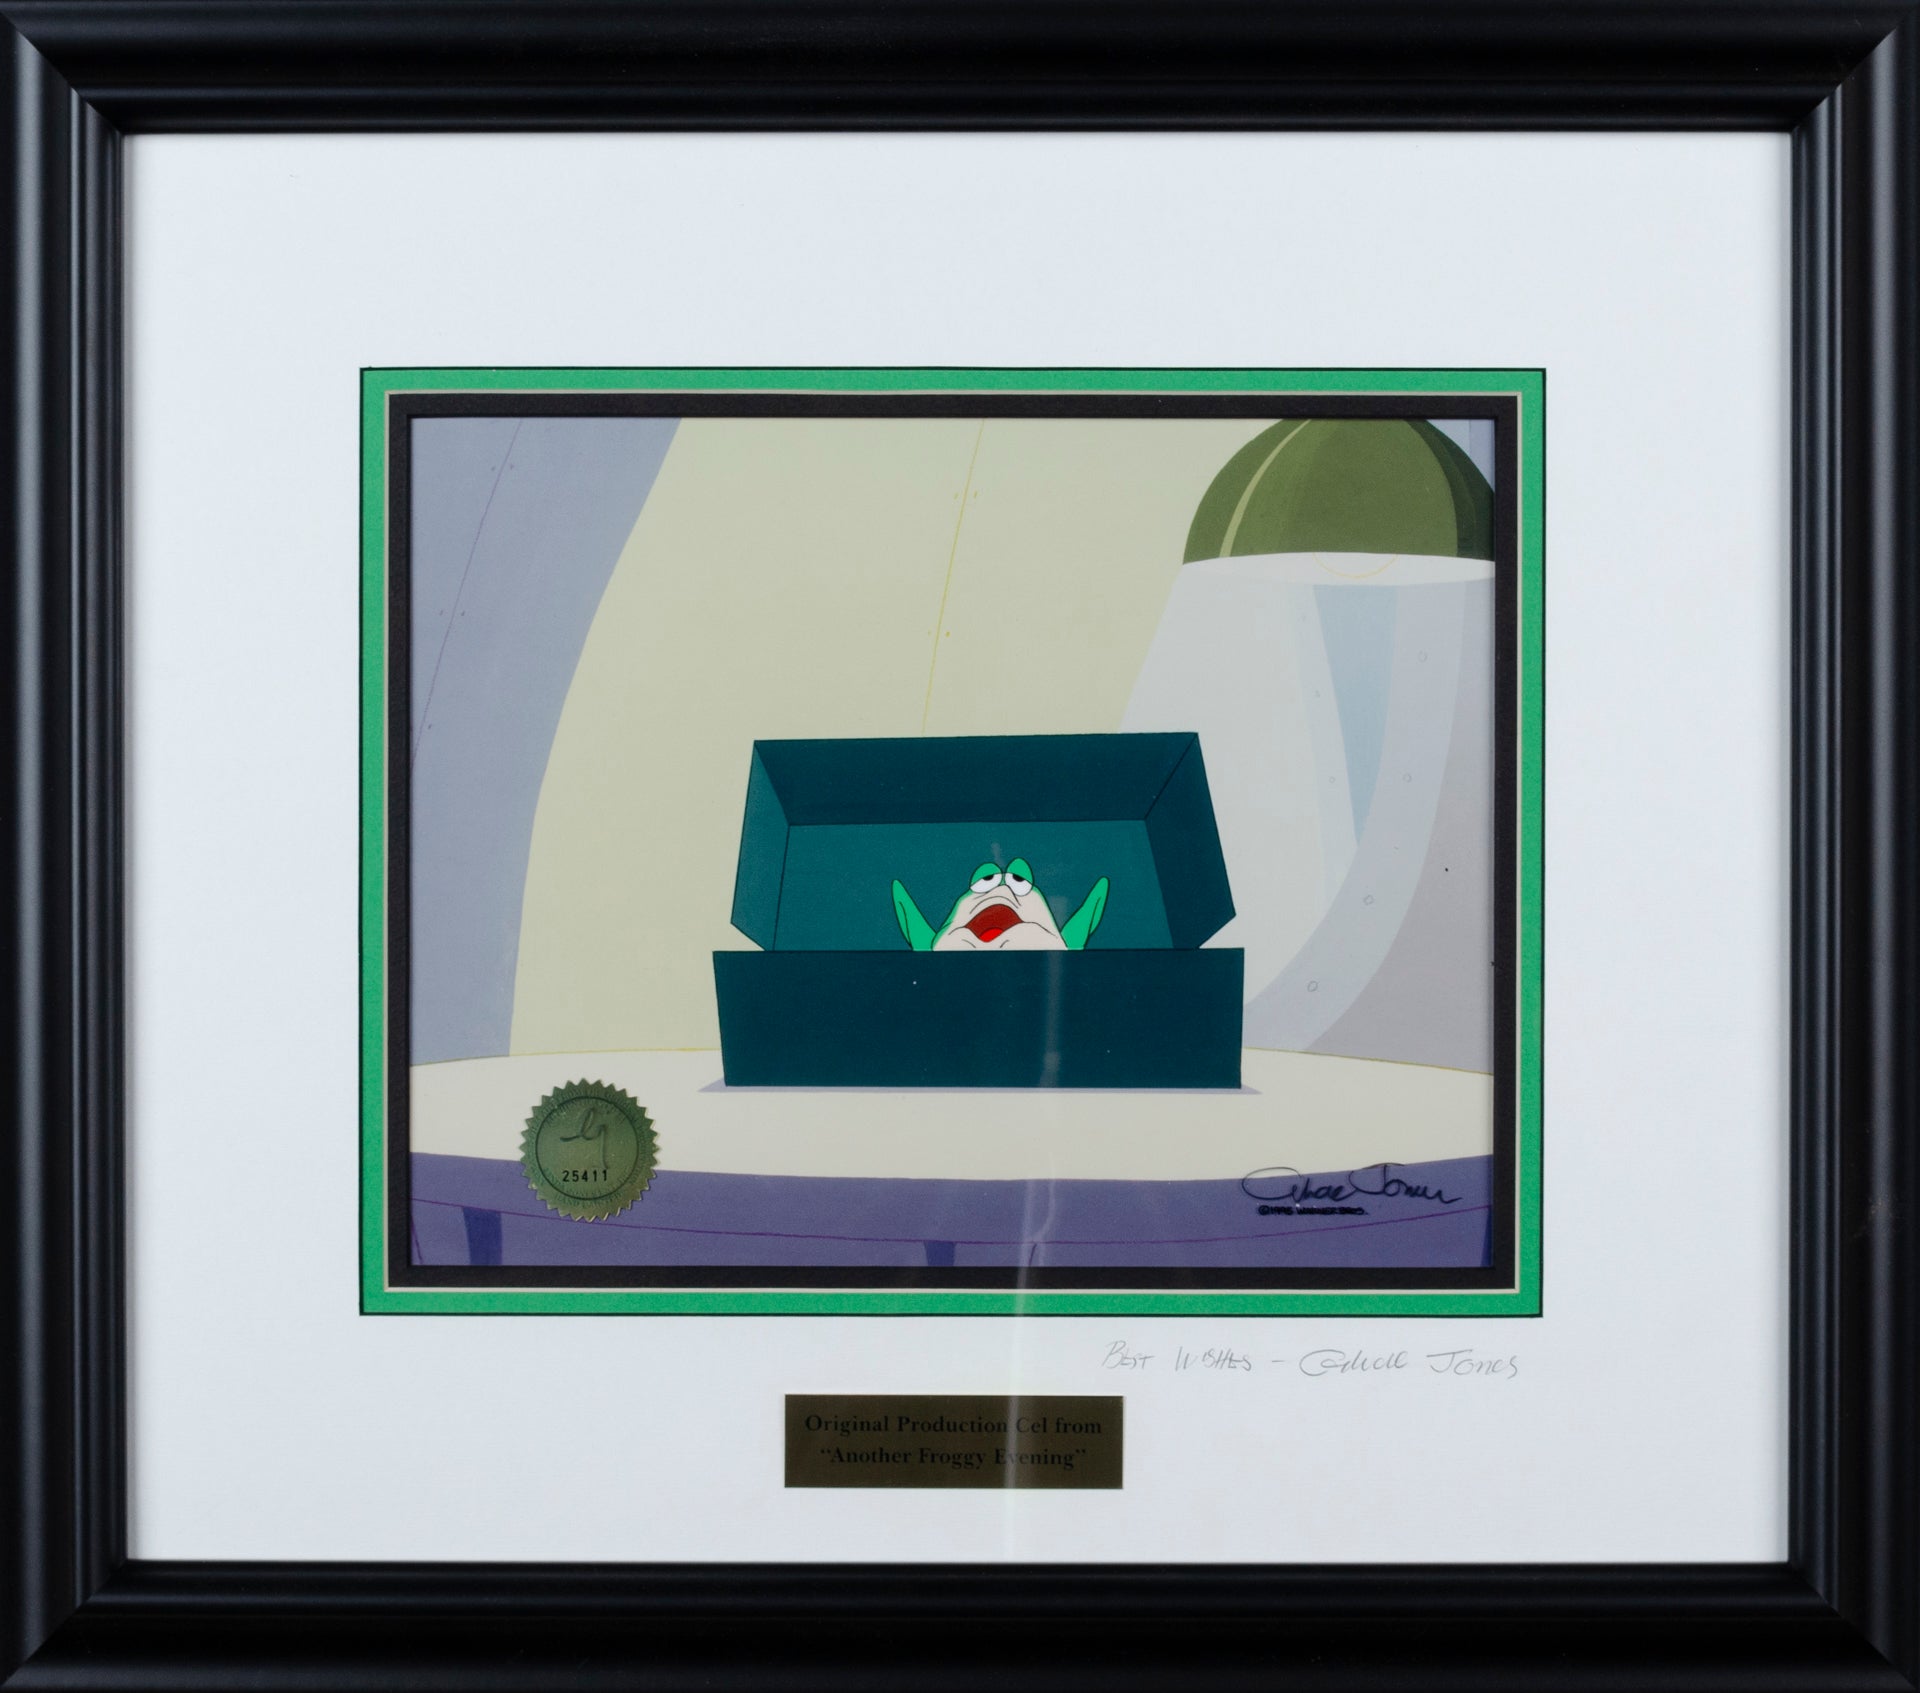 Original Production Cel from "Another Froggy Evening" Autographed by Chuck Jones